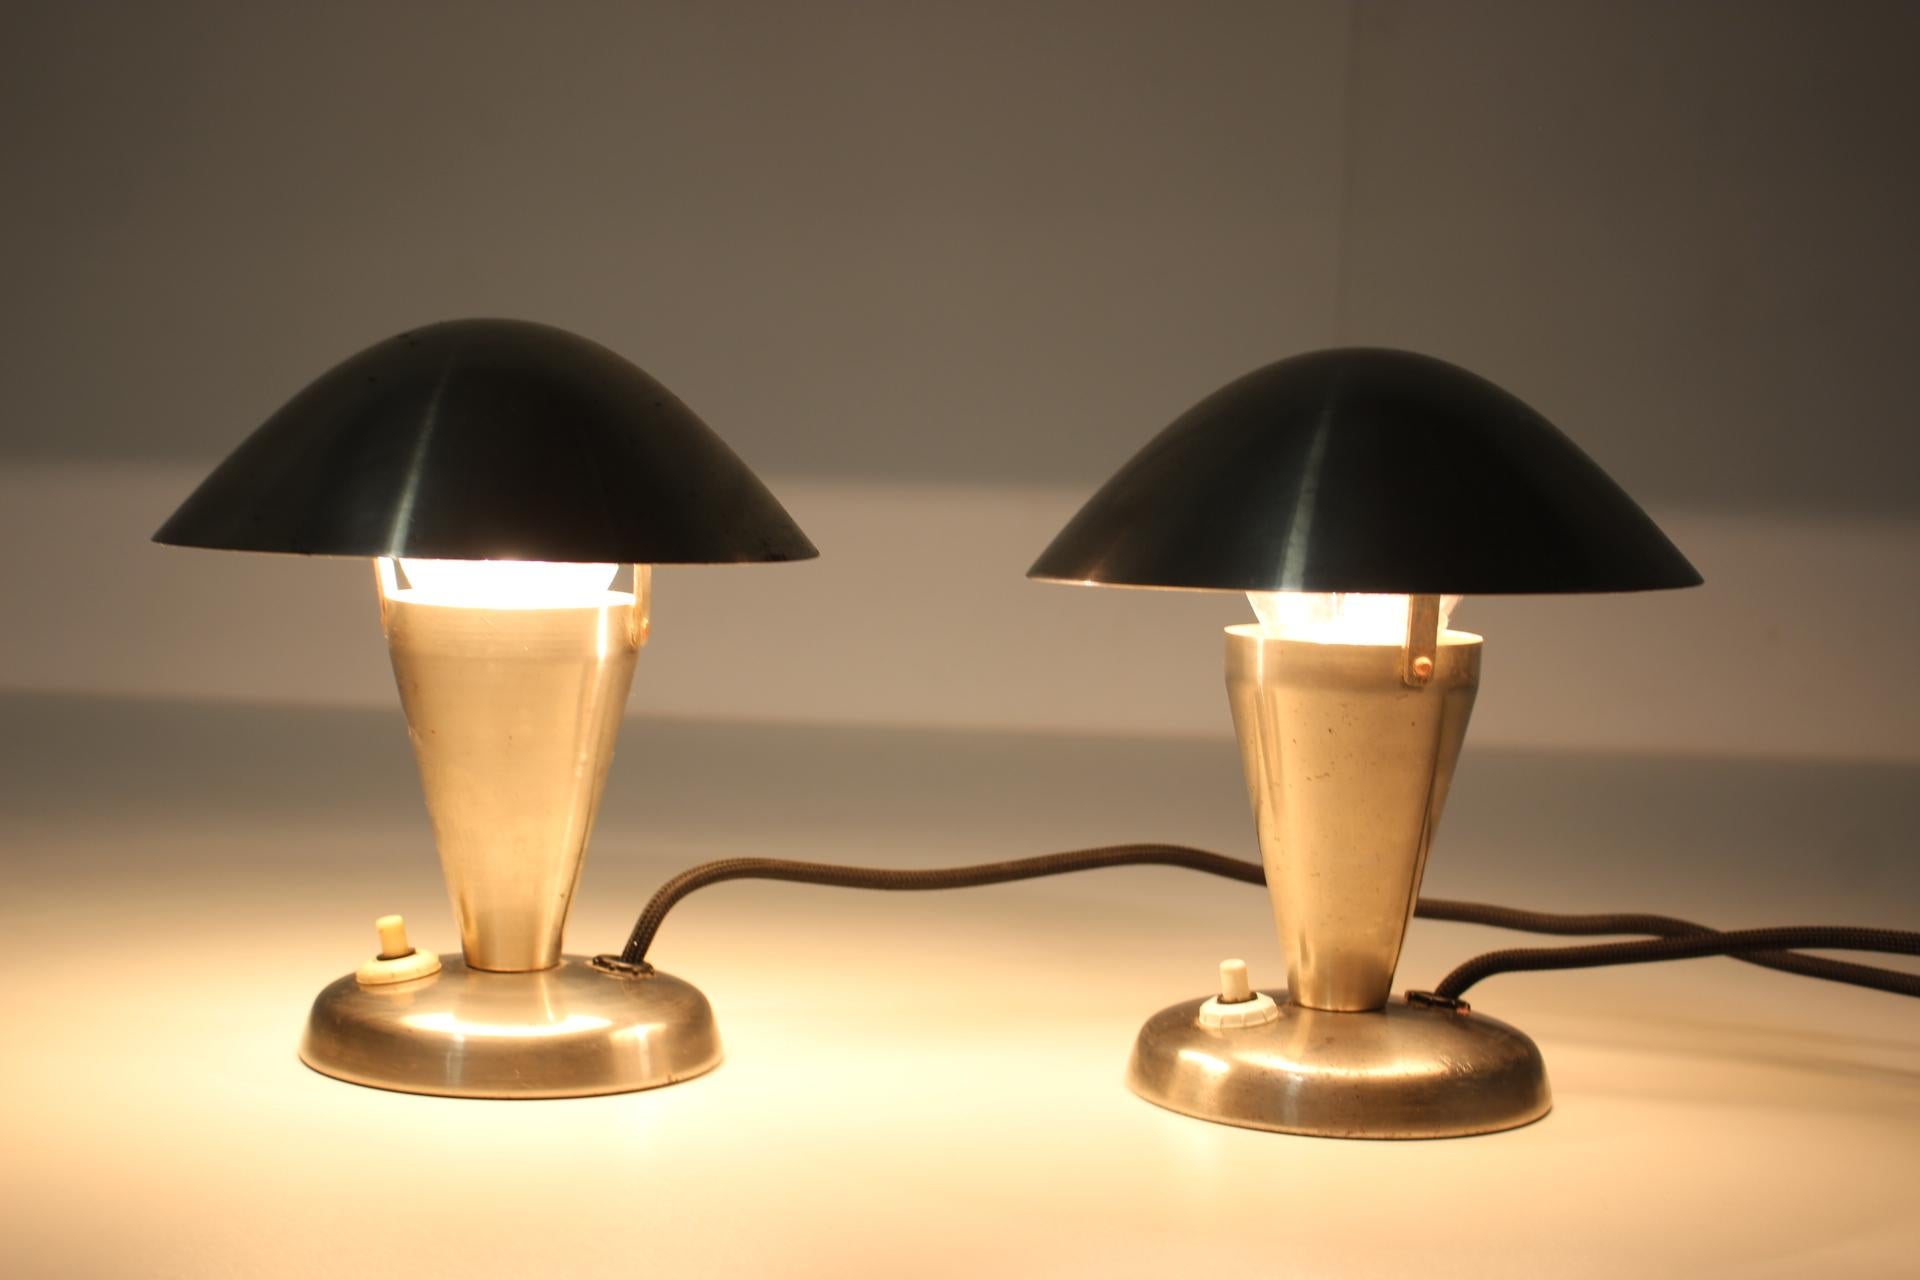 1930s Pair of Chrome Plated Bauhaus Lamps, Czechoslovakia In Good Condition For Sale In Praha, CZ